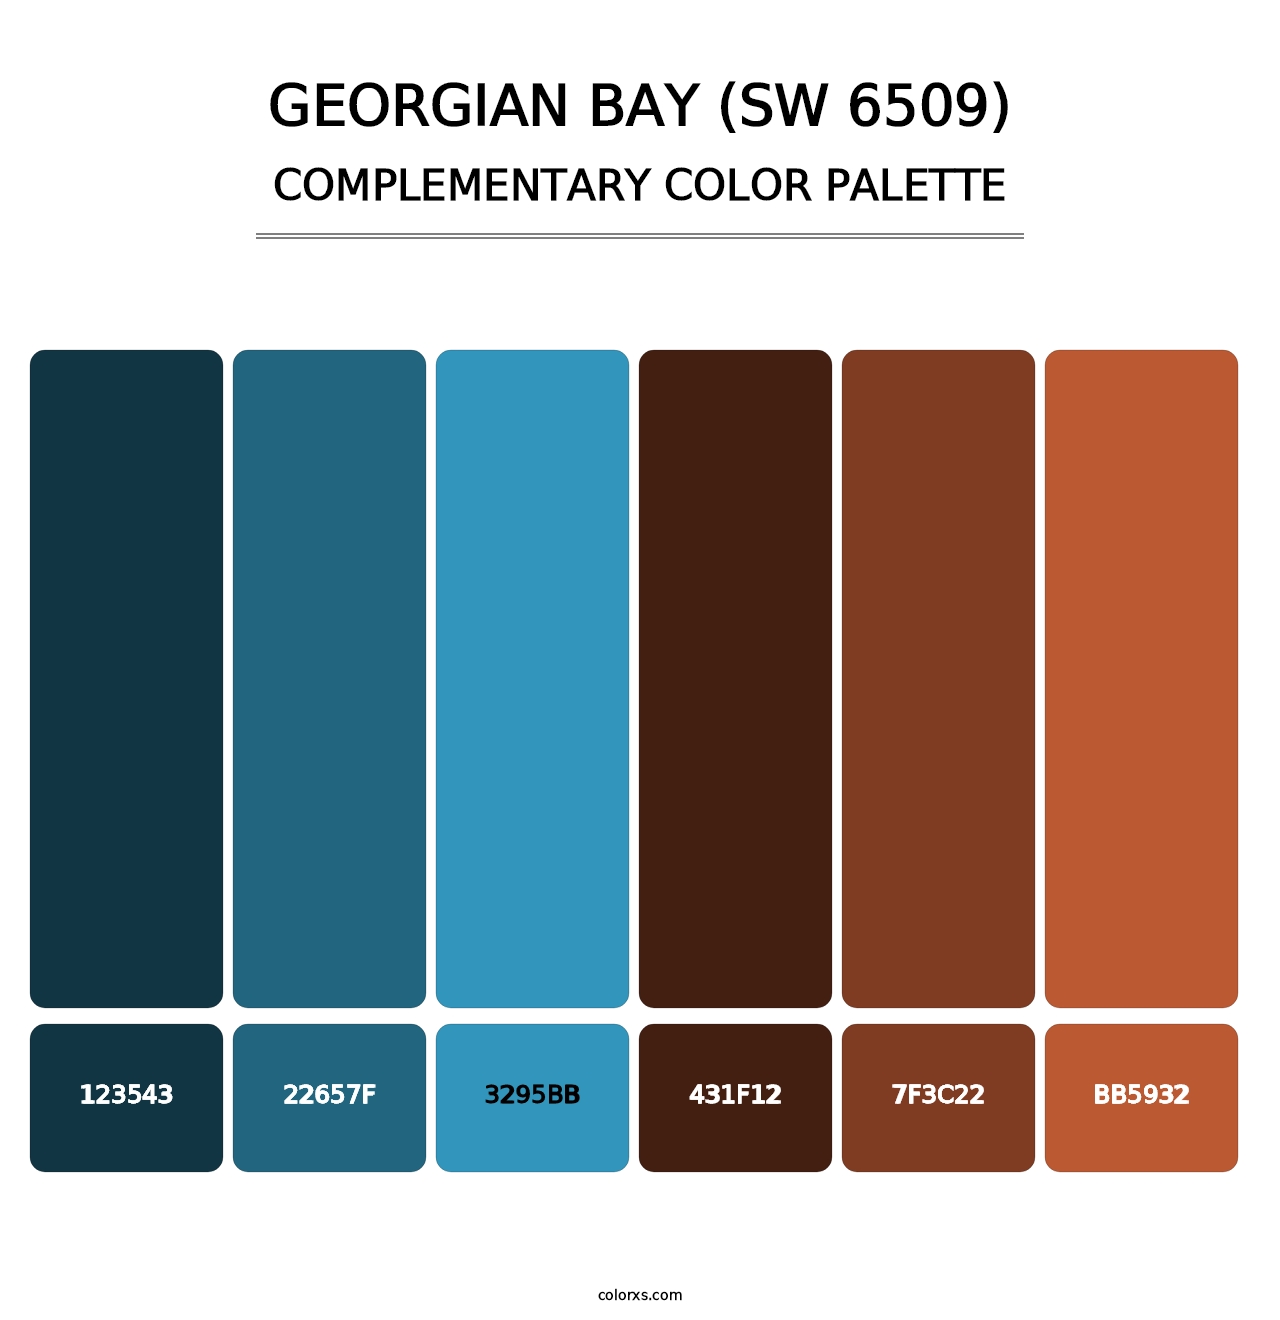 Georgian Bay (SW 6509) - Complementary Color Palette